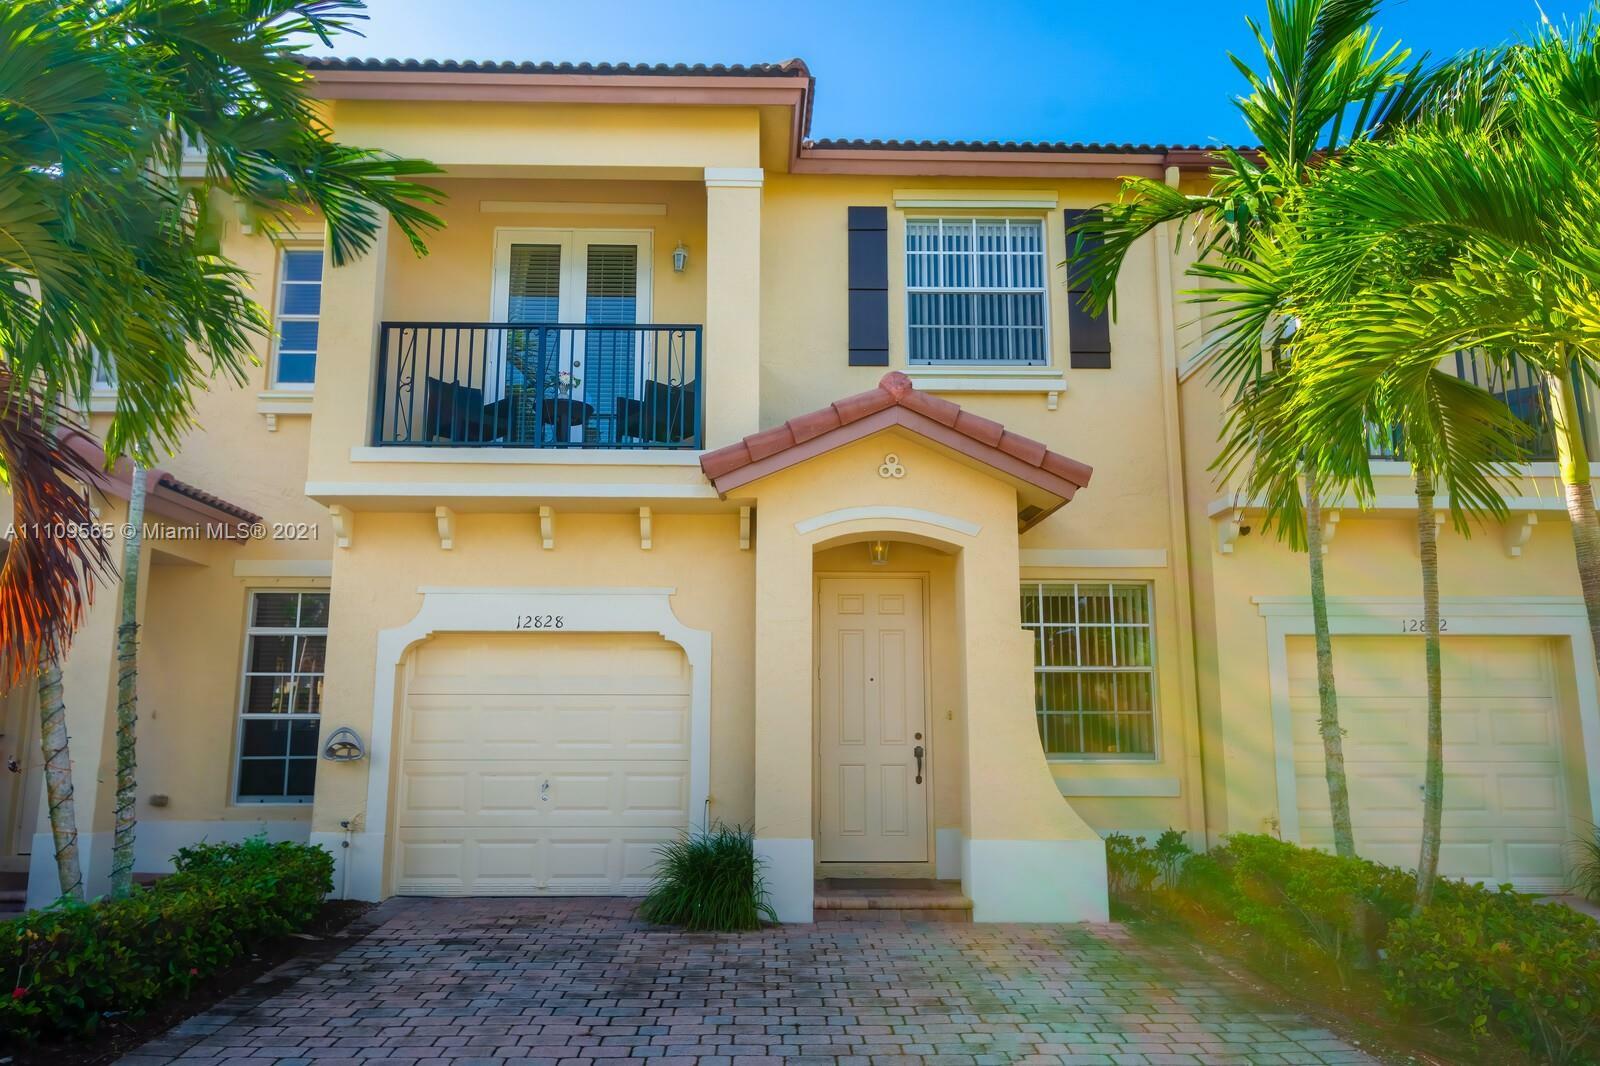 Property Photo:  12828 SW 133rd Ter  FL 33186 